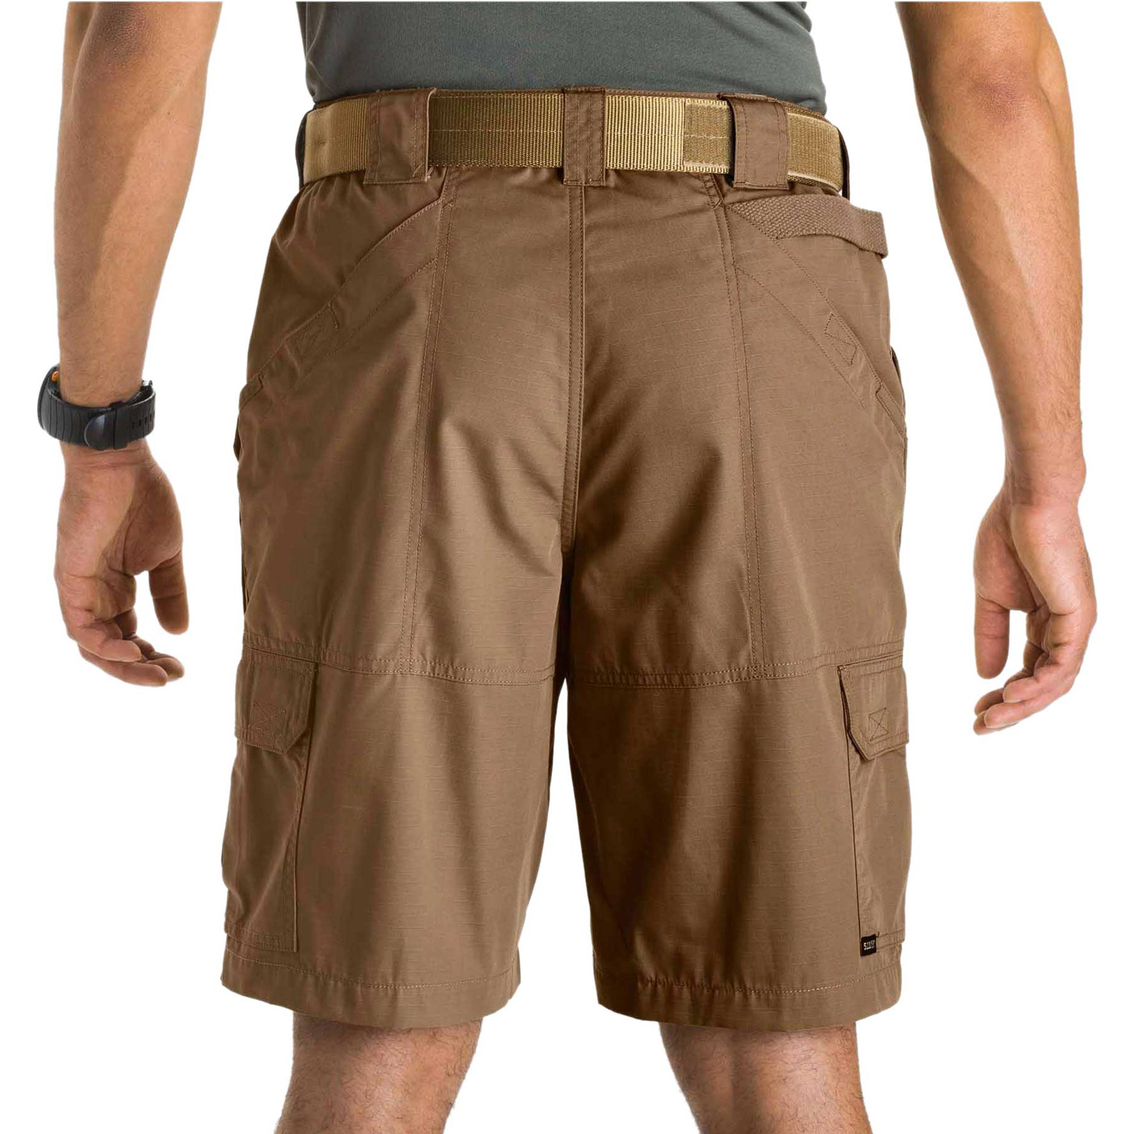 5.11 Taclite Pro 11 Shorts | Shorts | Clothing & Accessories | Shop The ...